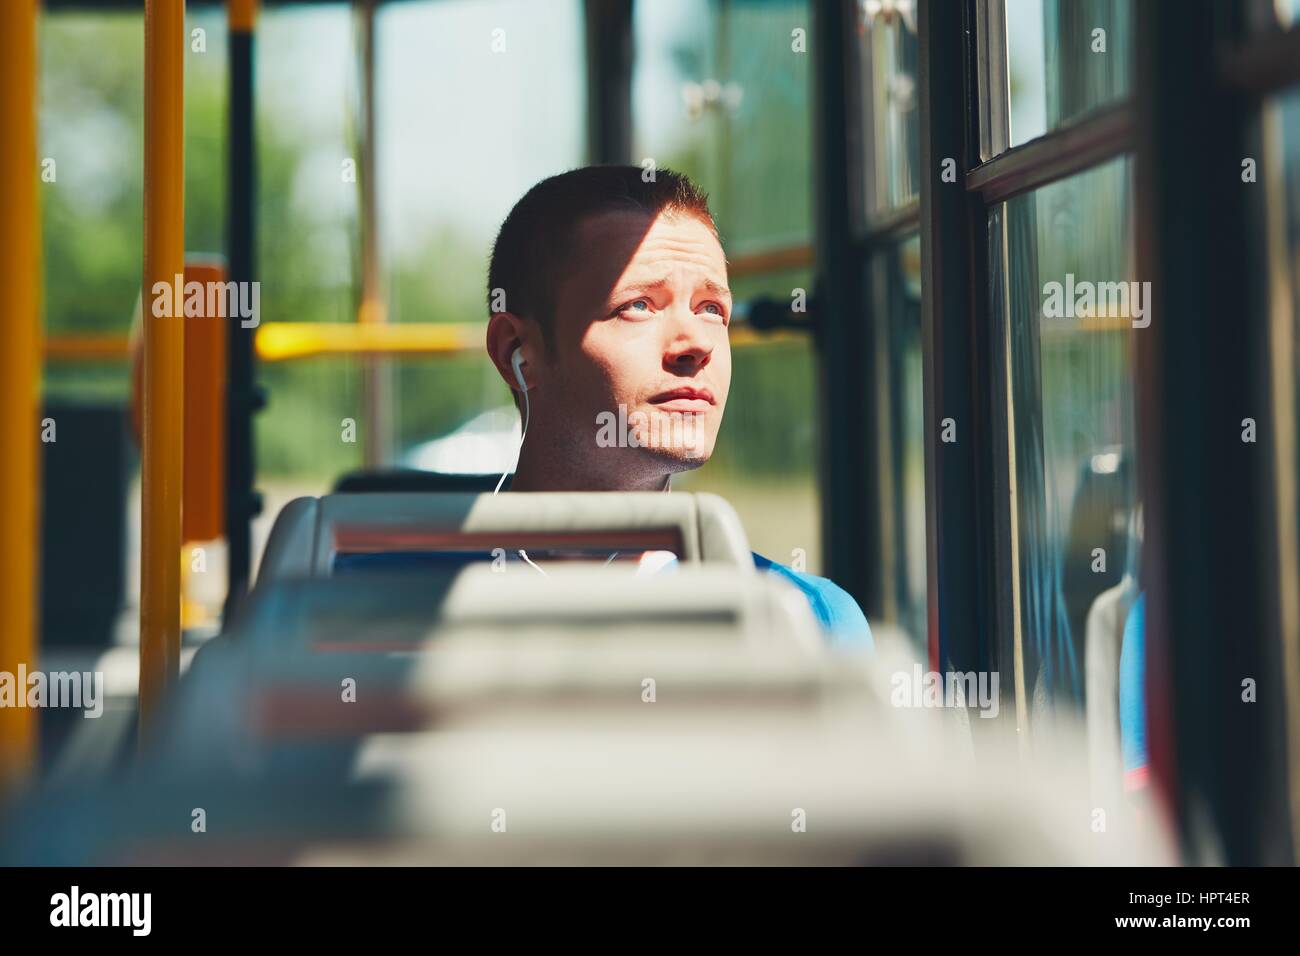 Everyday life and commuting to work by public transportation. Handsome young man is traveling by tram. Stock Photo